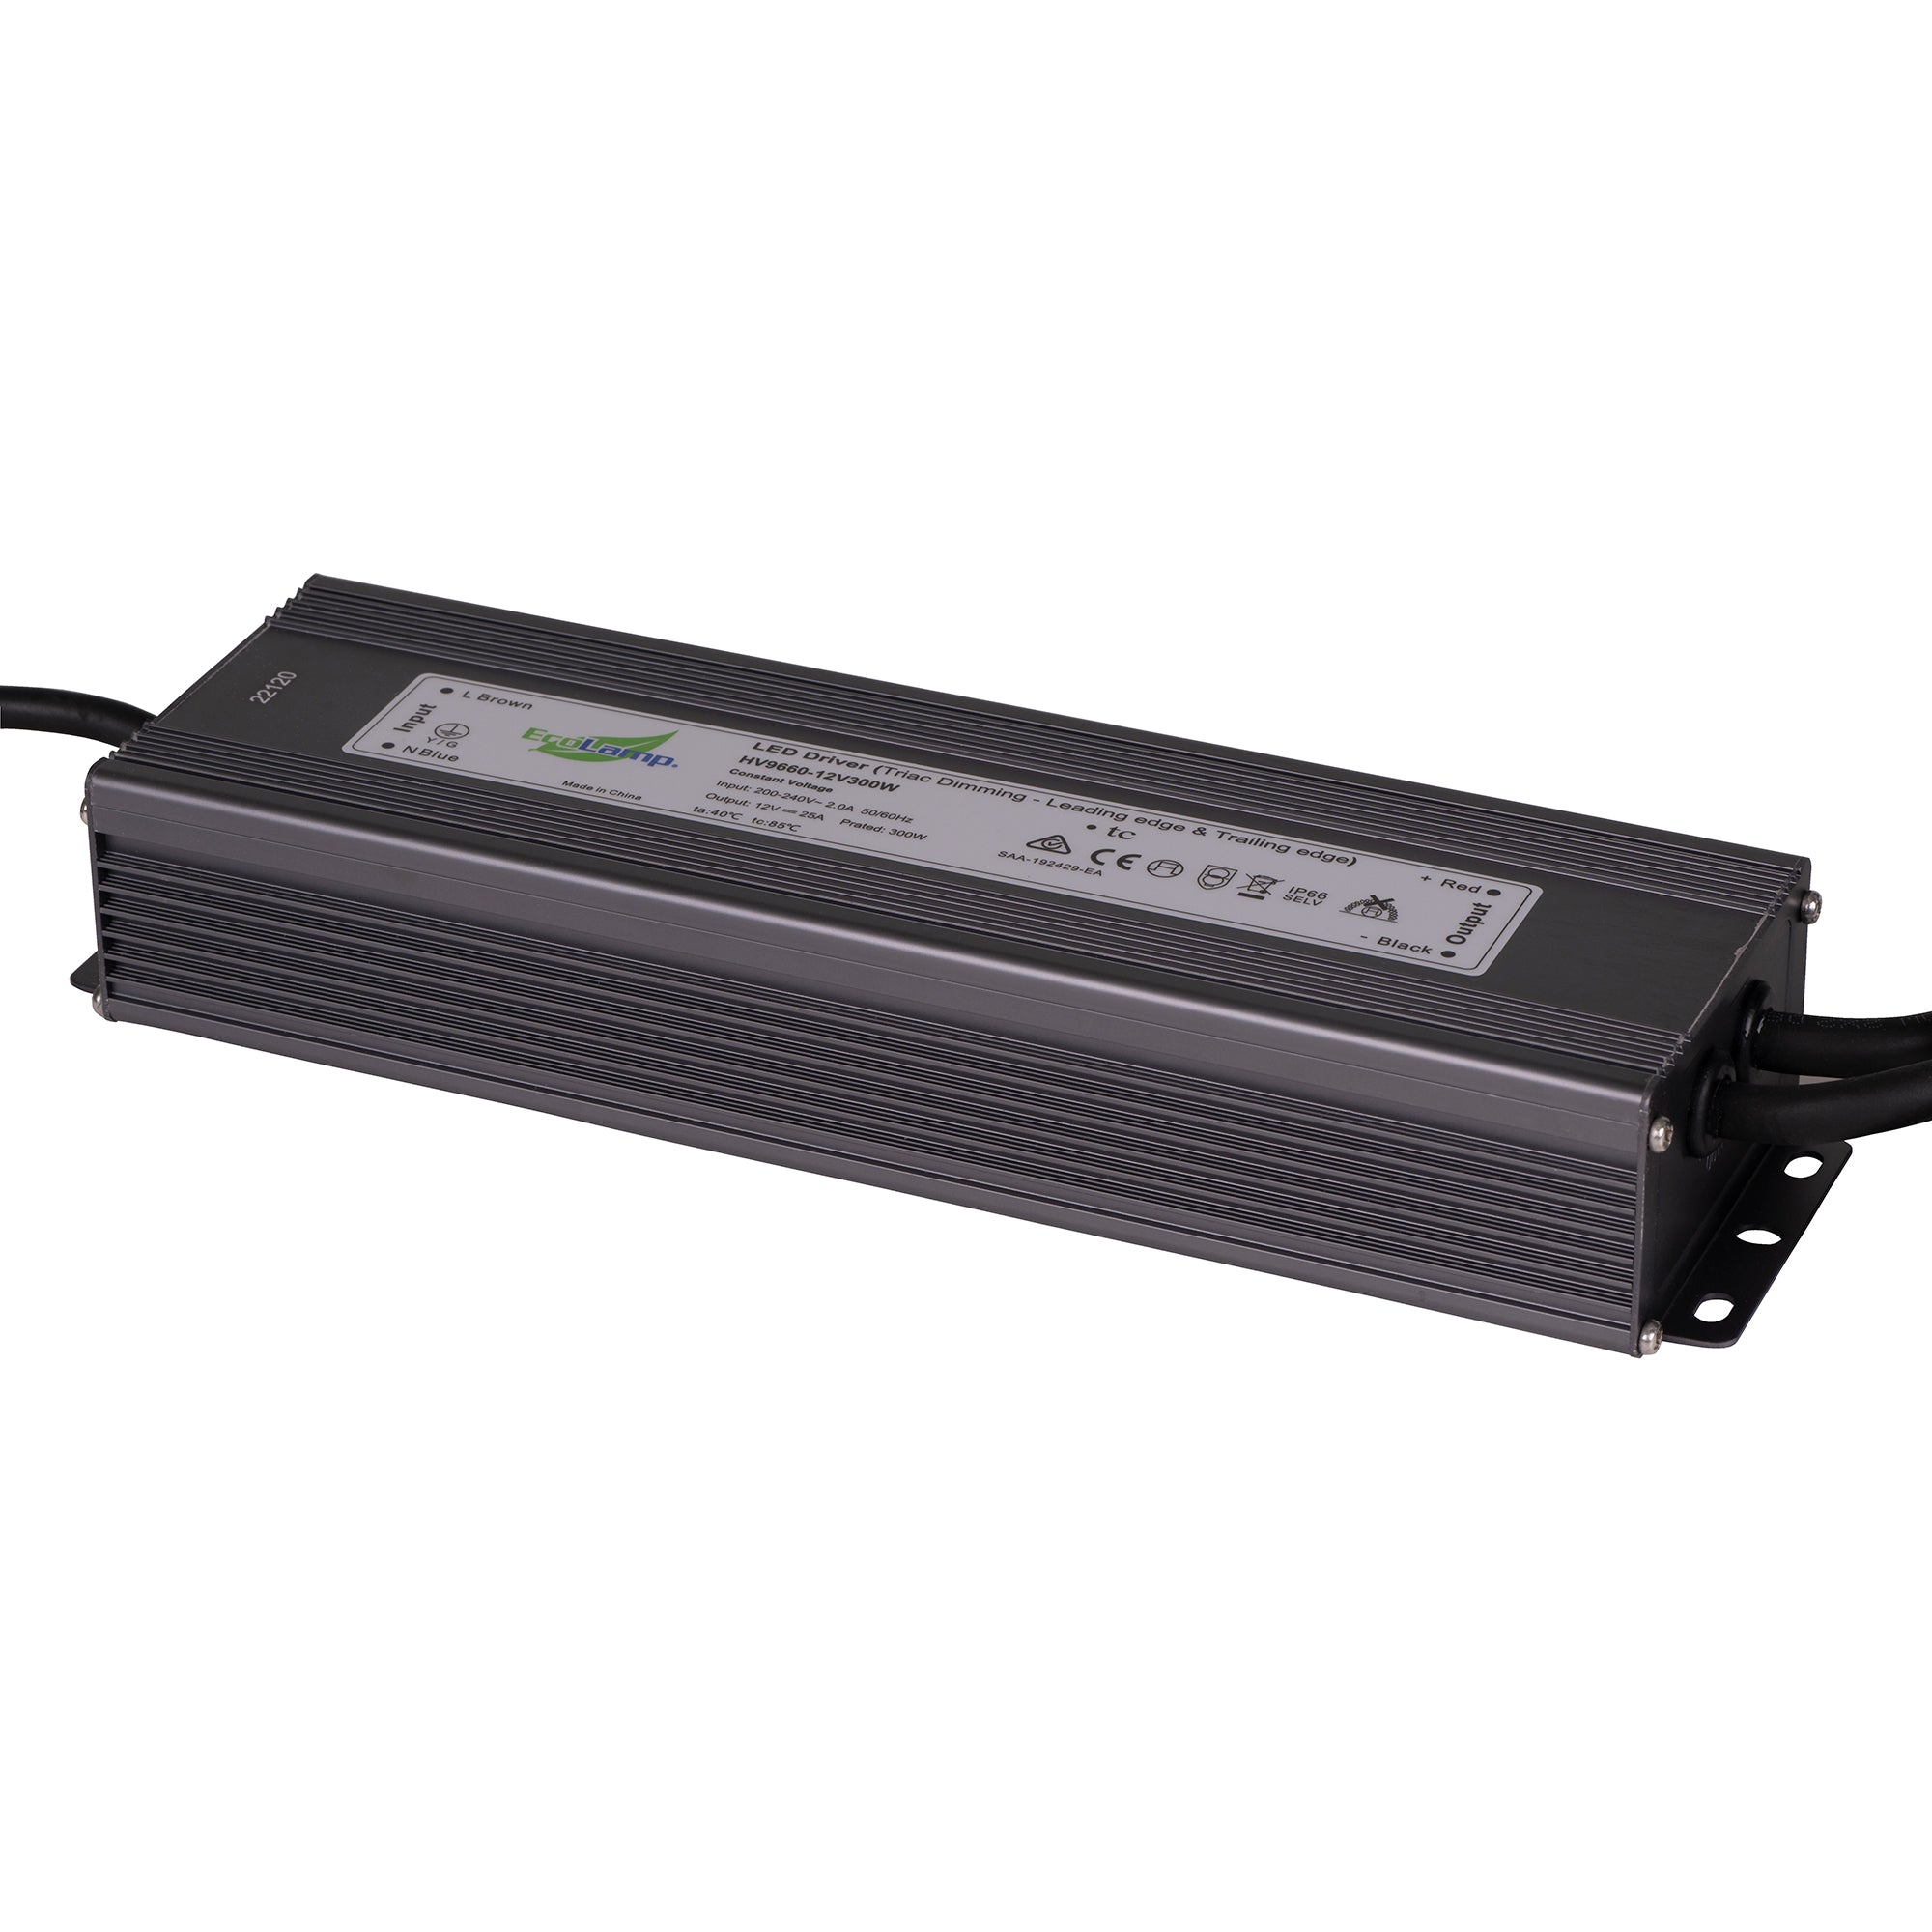 HV9660-300W - 300W Weatherproof Dimmable LED Driver